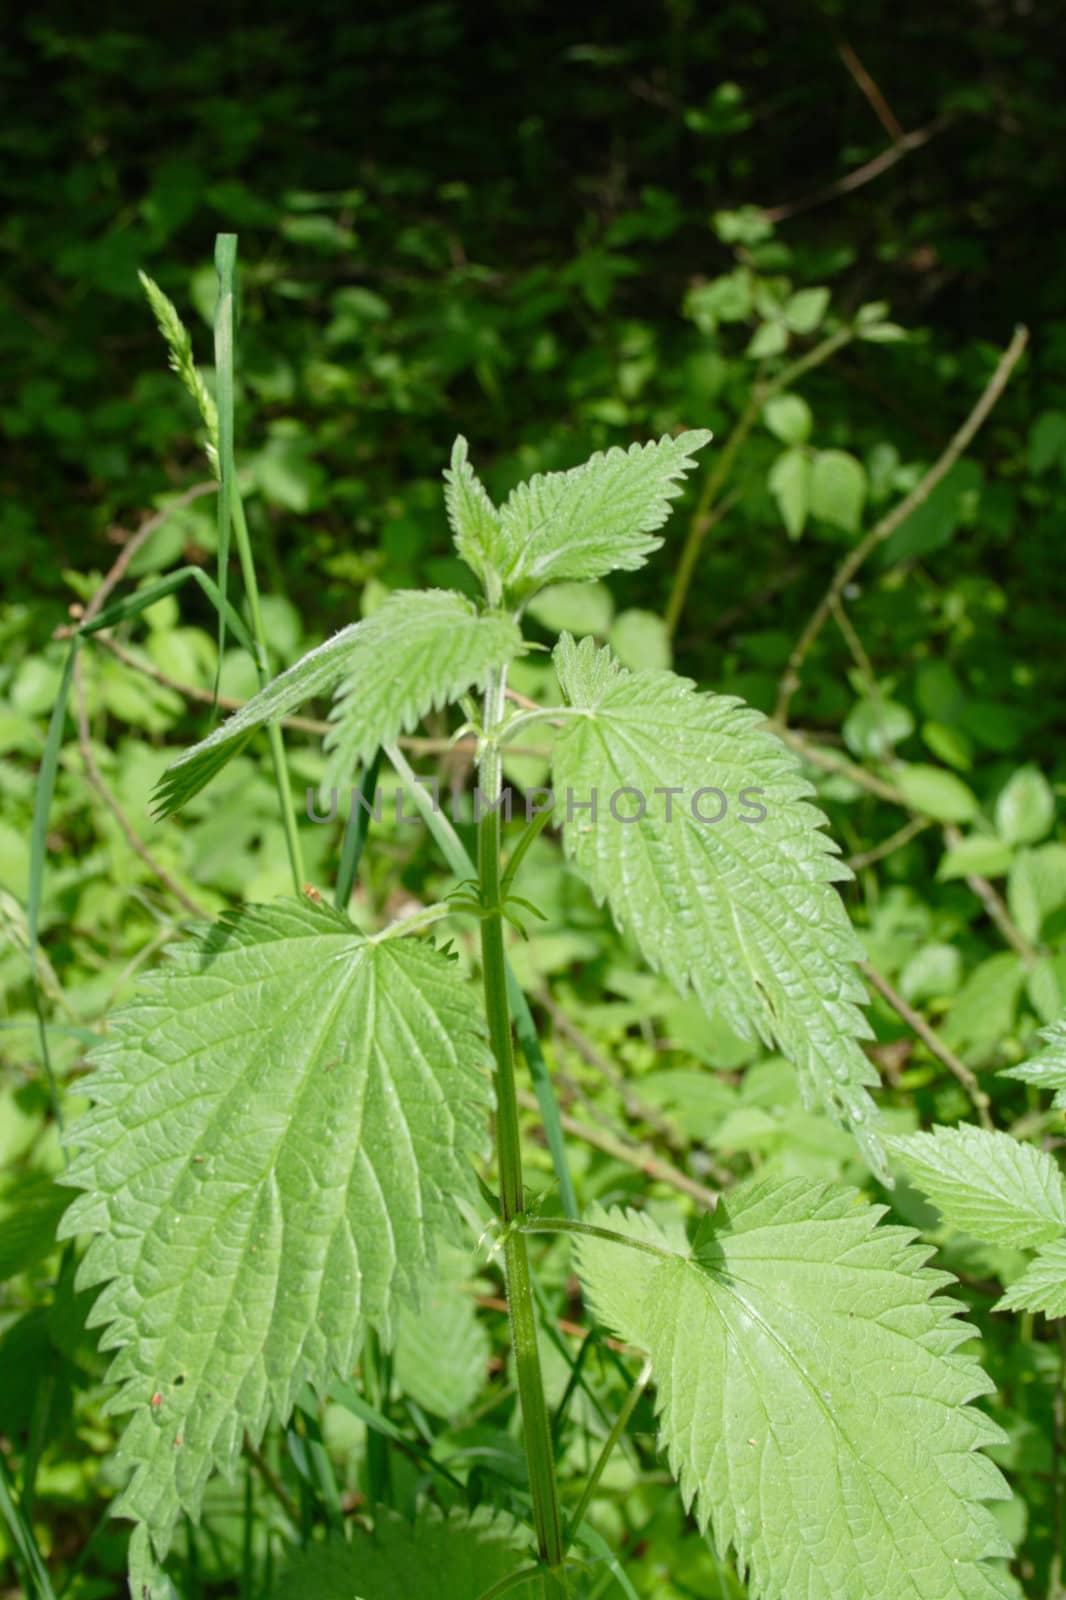 growing in thickets nettle, the colored photo